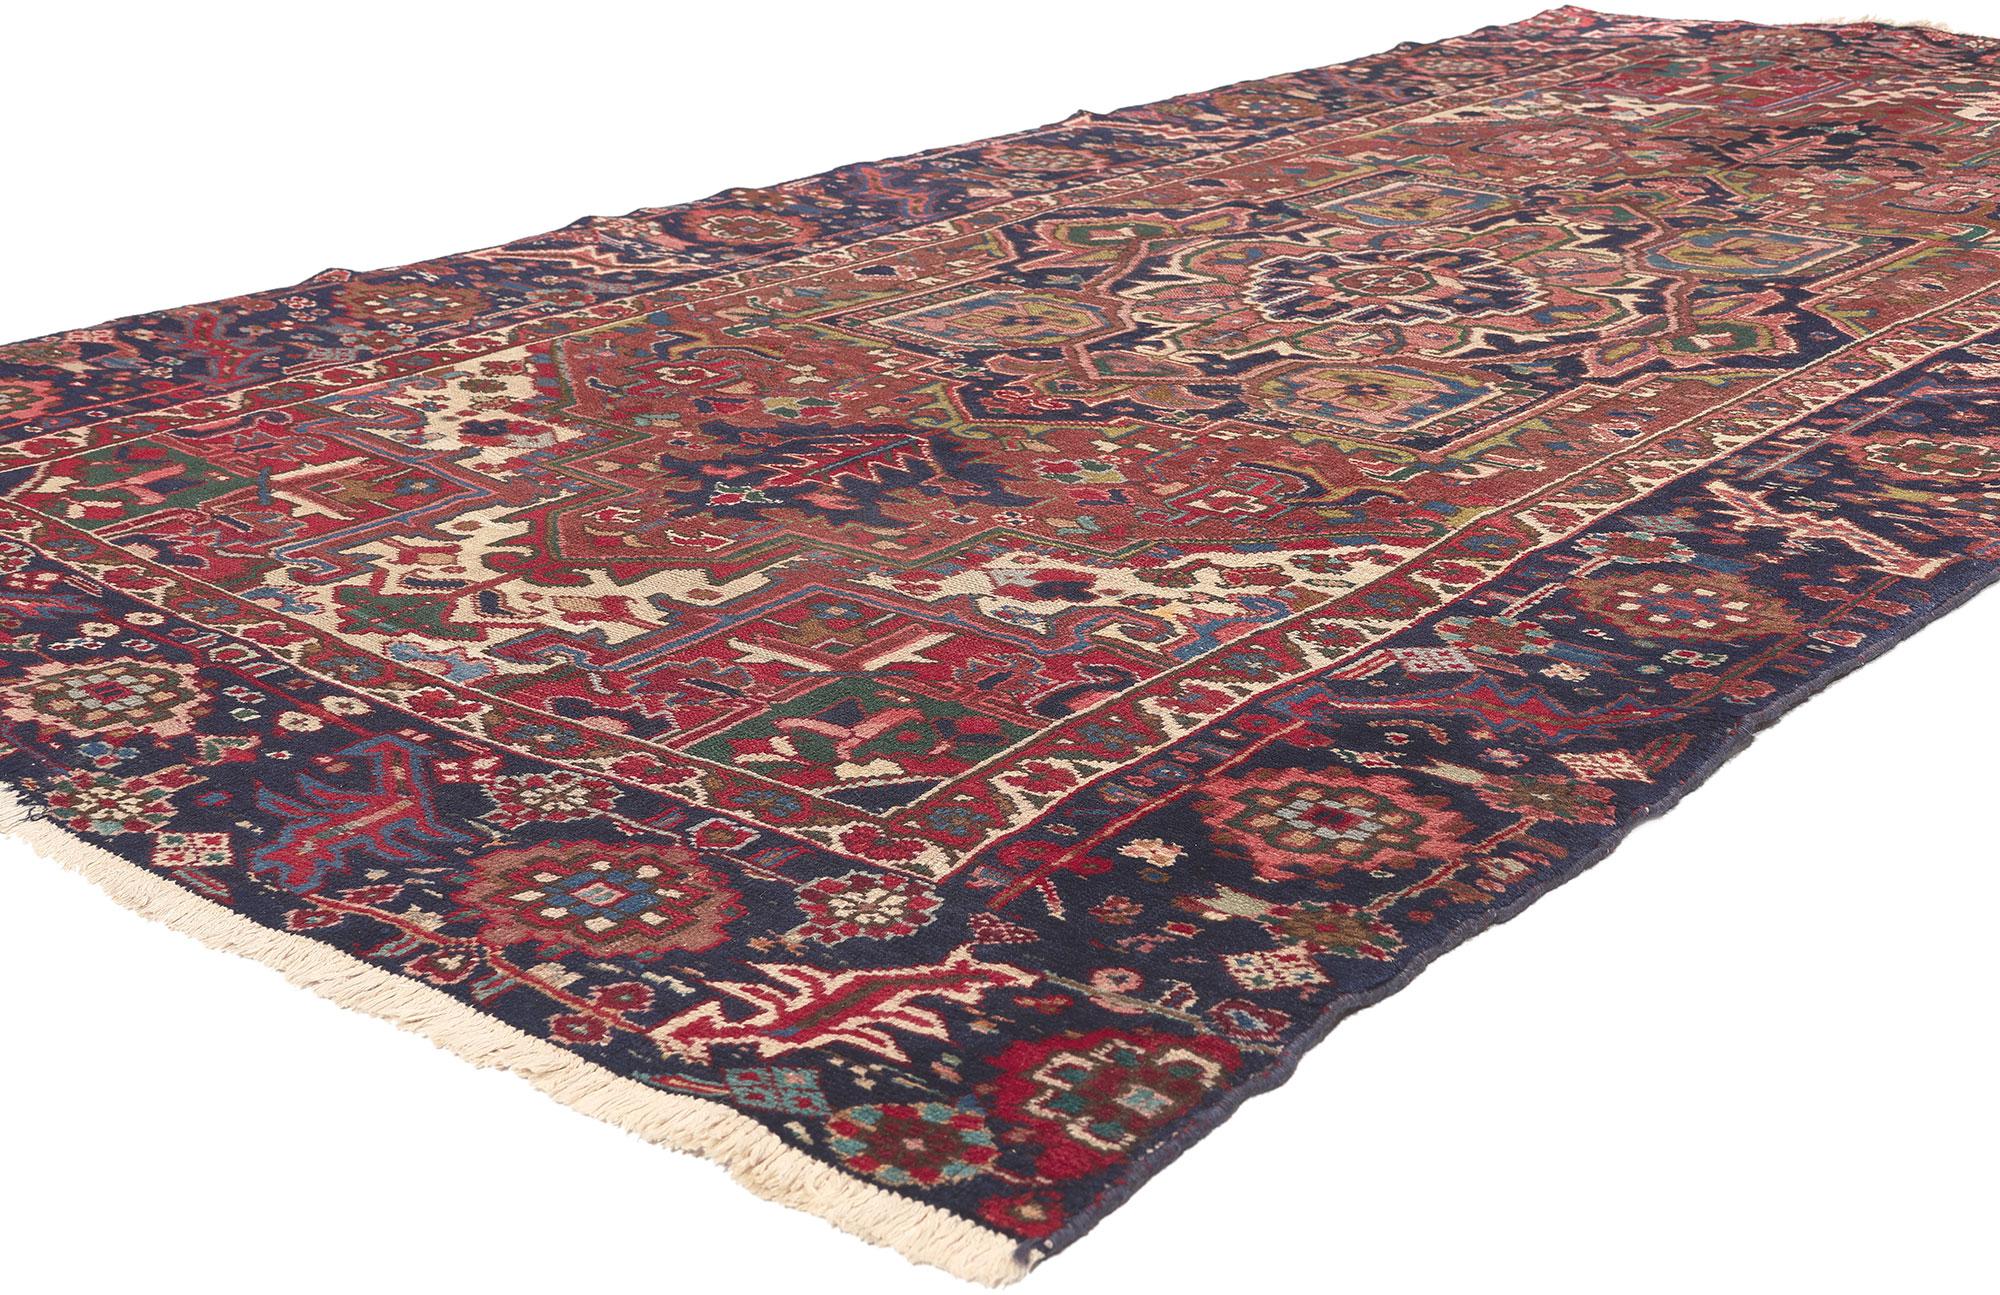 72658 Antique Persian Heriz Rug, 05'01 x 10'02.
Timeless appeal meets modern elegance this hand knotted wool antique Persian Heriz rug. The decorative geometric details and sophisticated color palette woven into this piece work together creating a